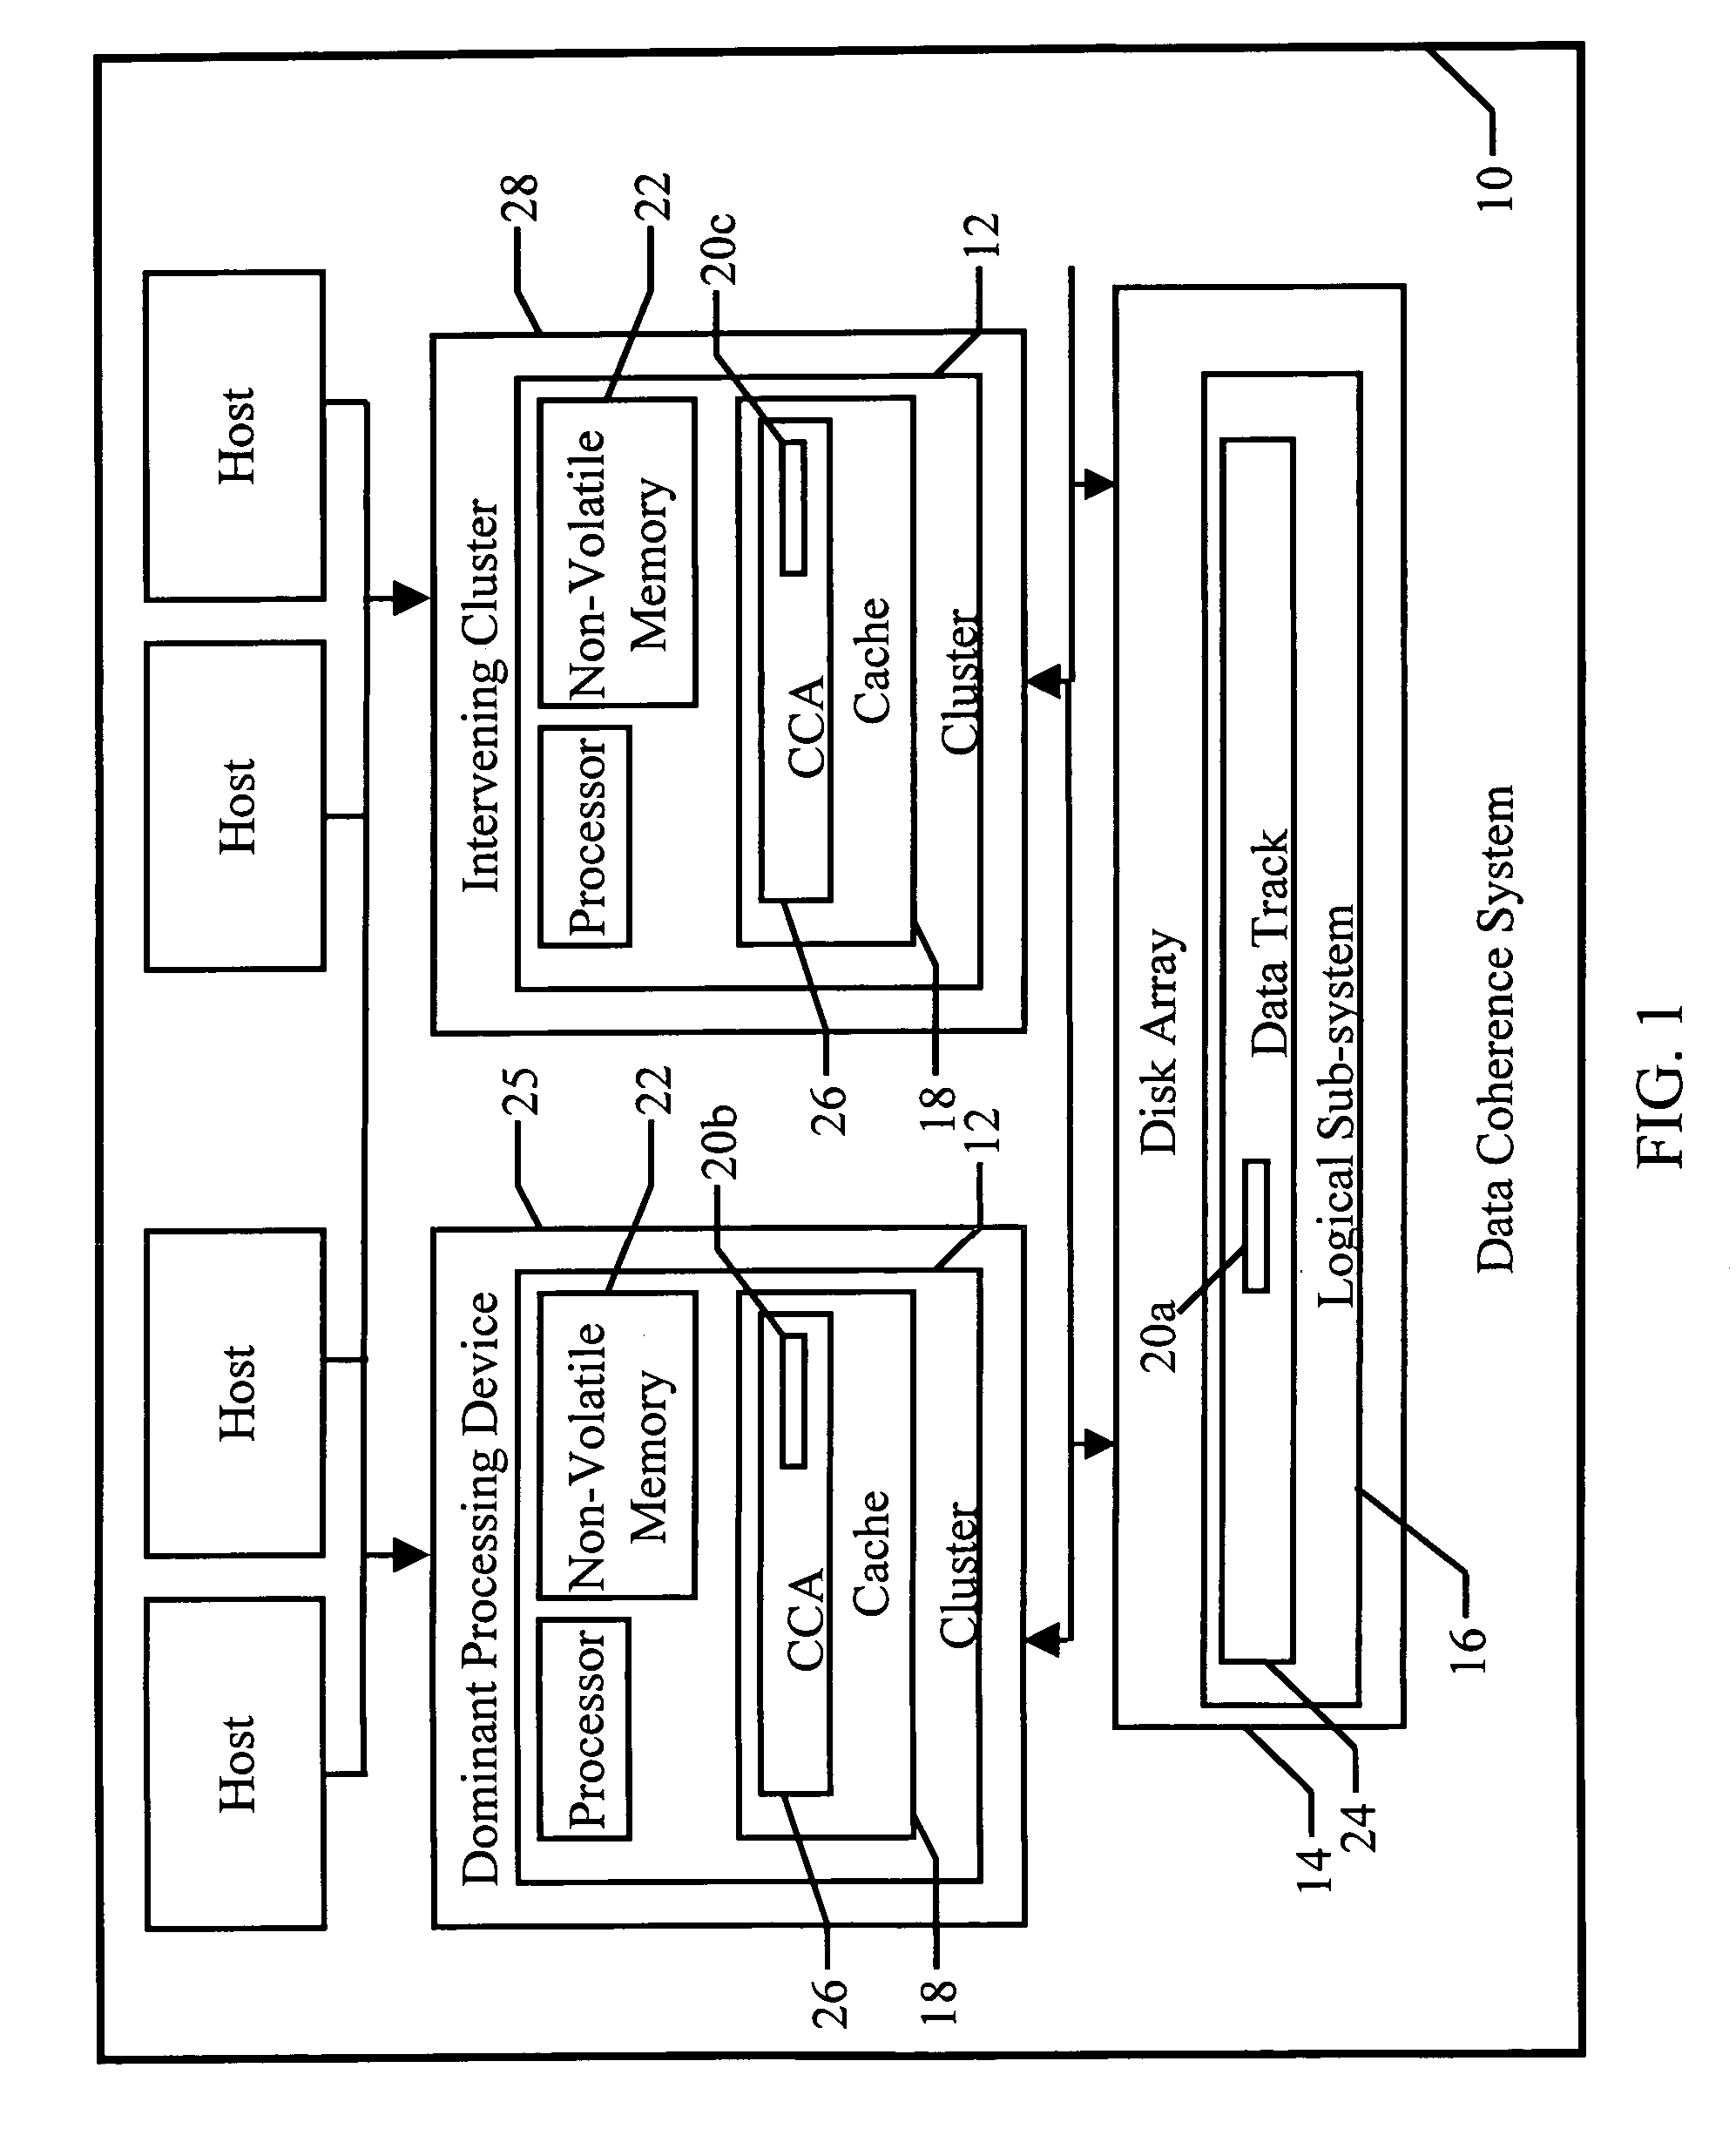 Data coherence system